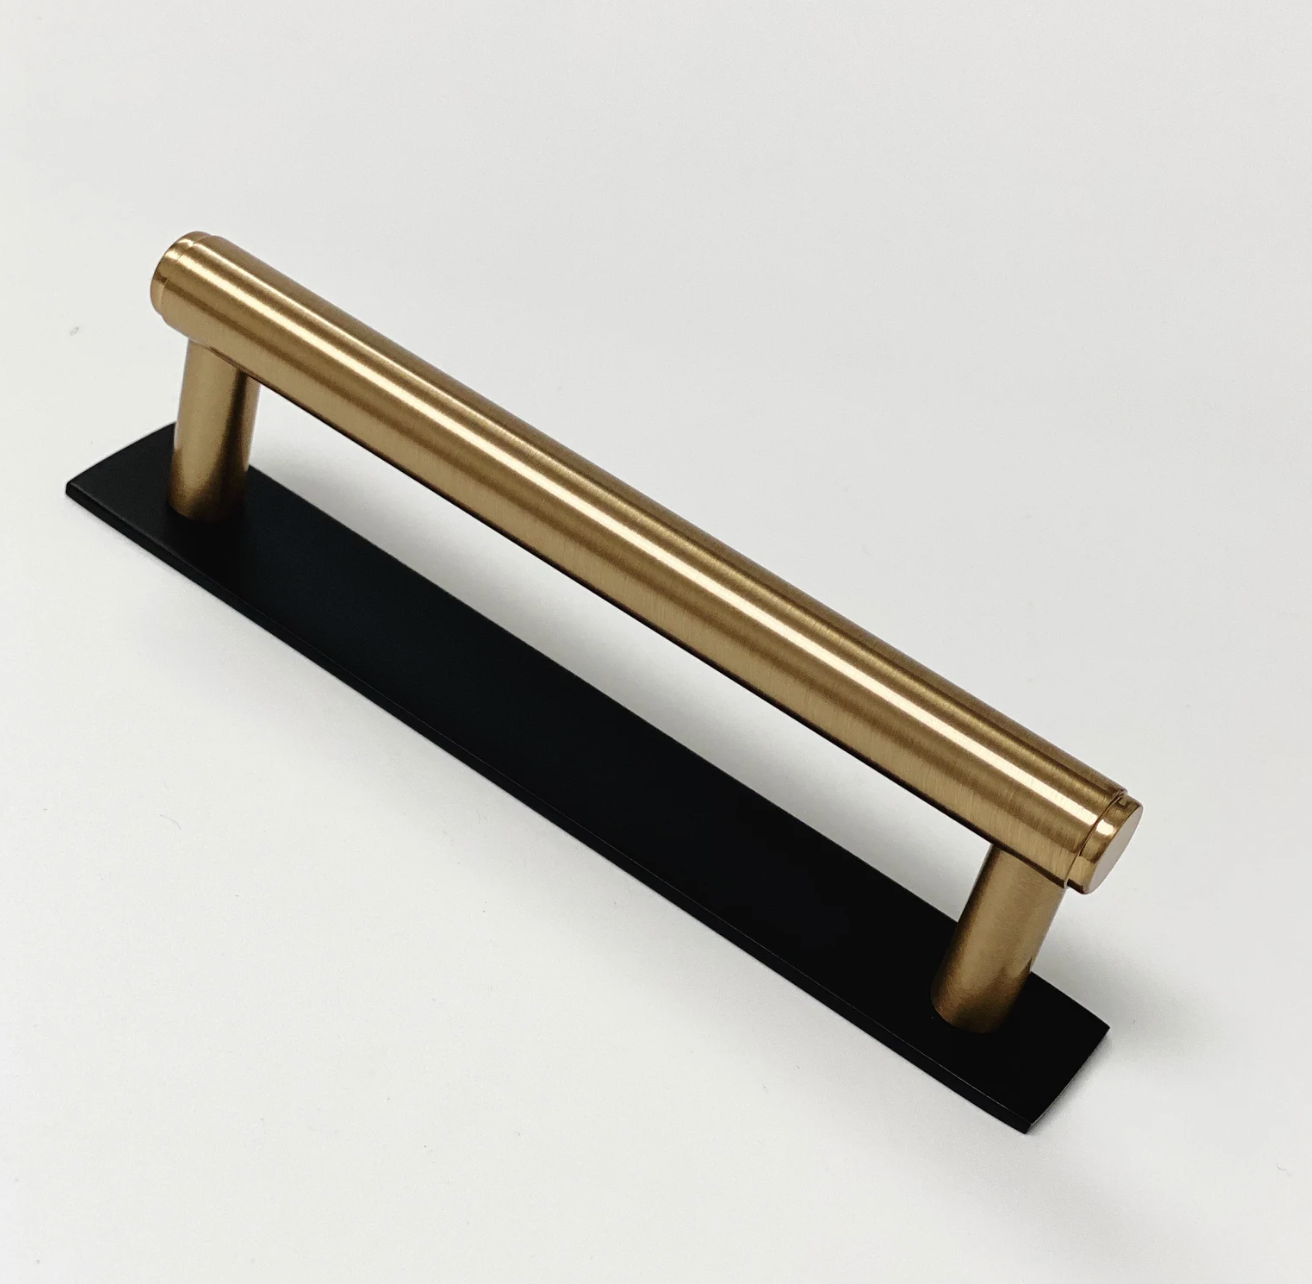 Dual Finish Maison No. 2 Smooth Matte Black and Champagne Bronze Drawer  Pulls and Cabinet Knobs with Backplate